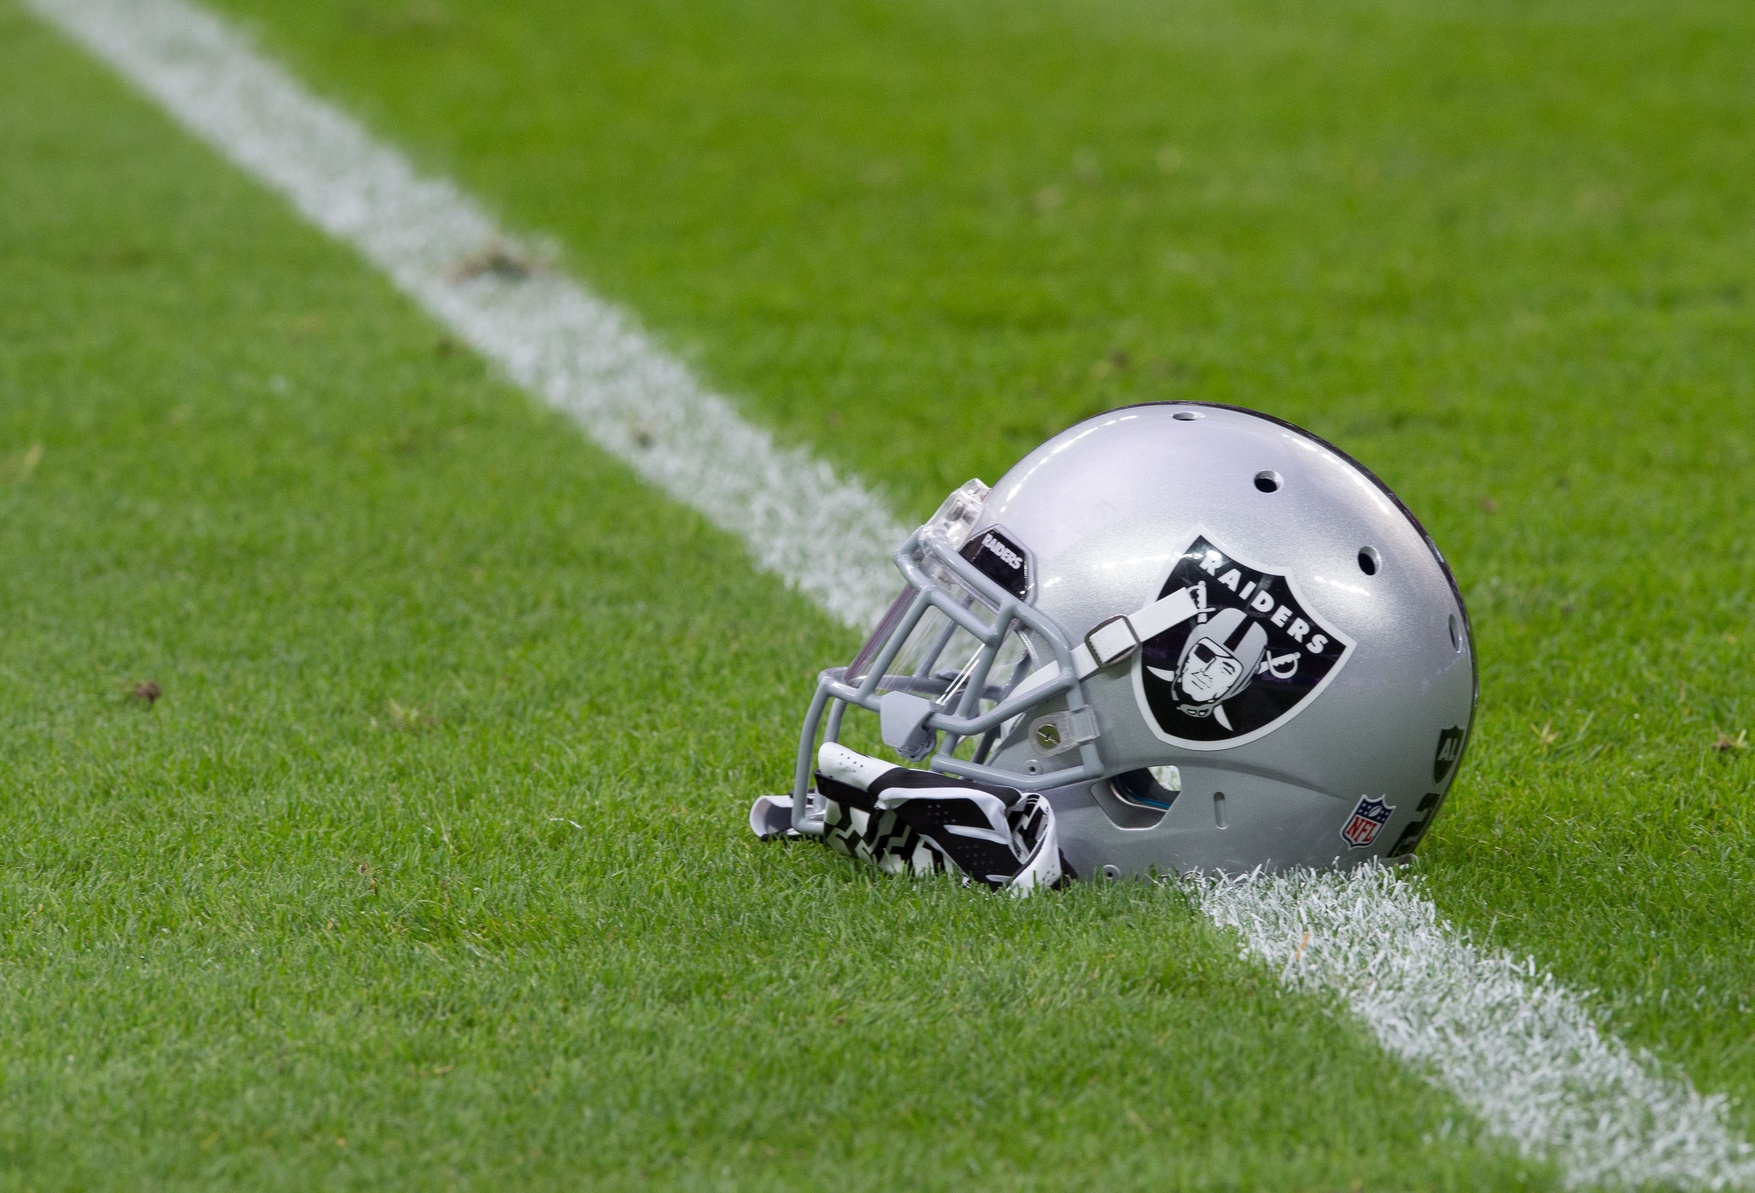 ESPN Report: Las Vegas Raiders just confirmed the signing of a highly rated Player from…